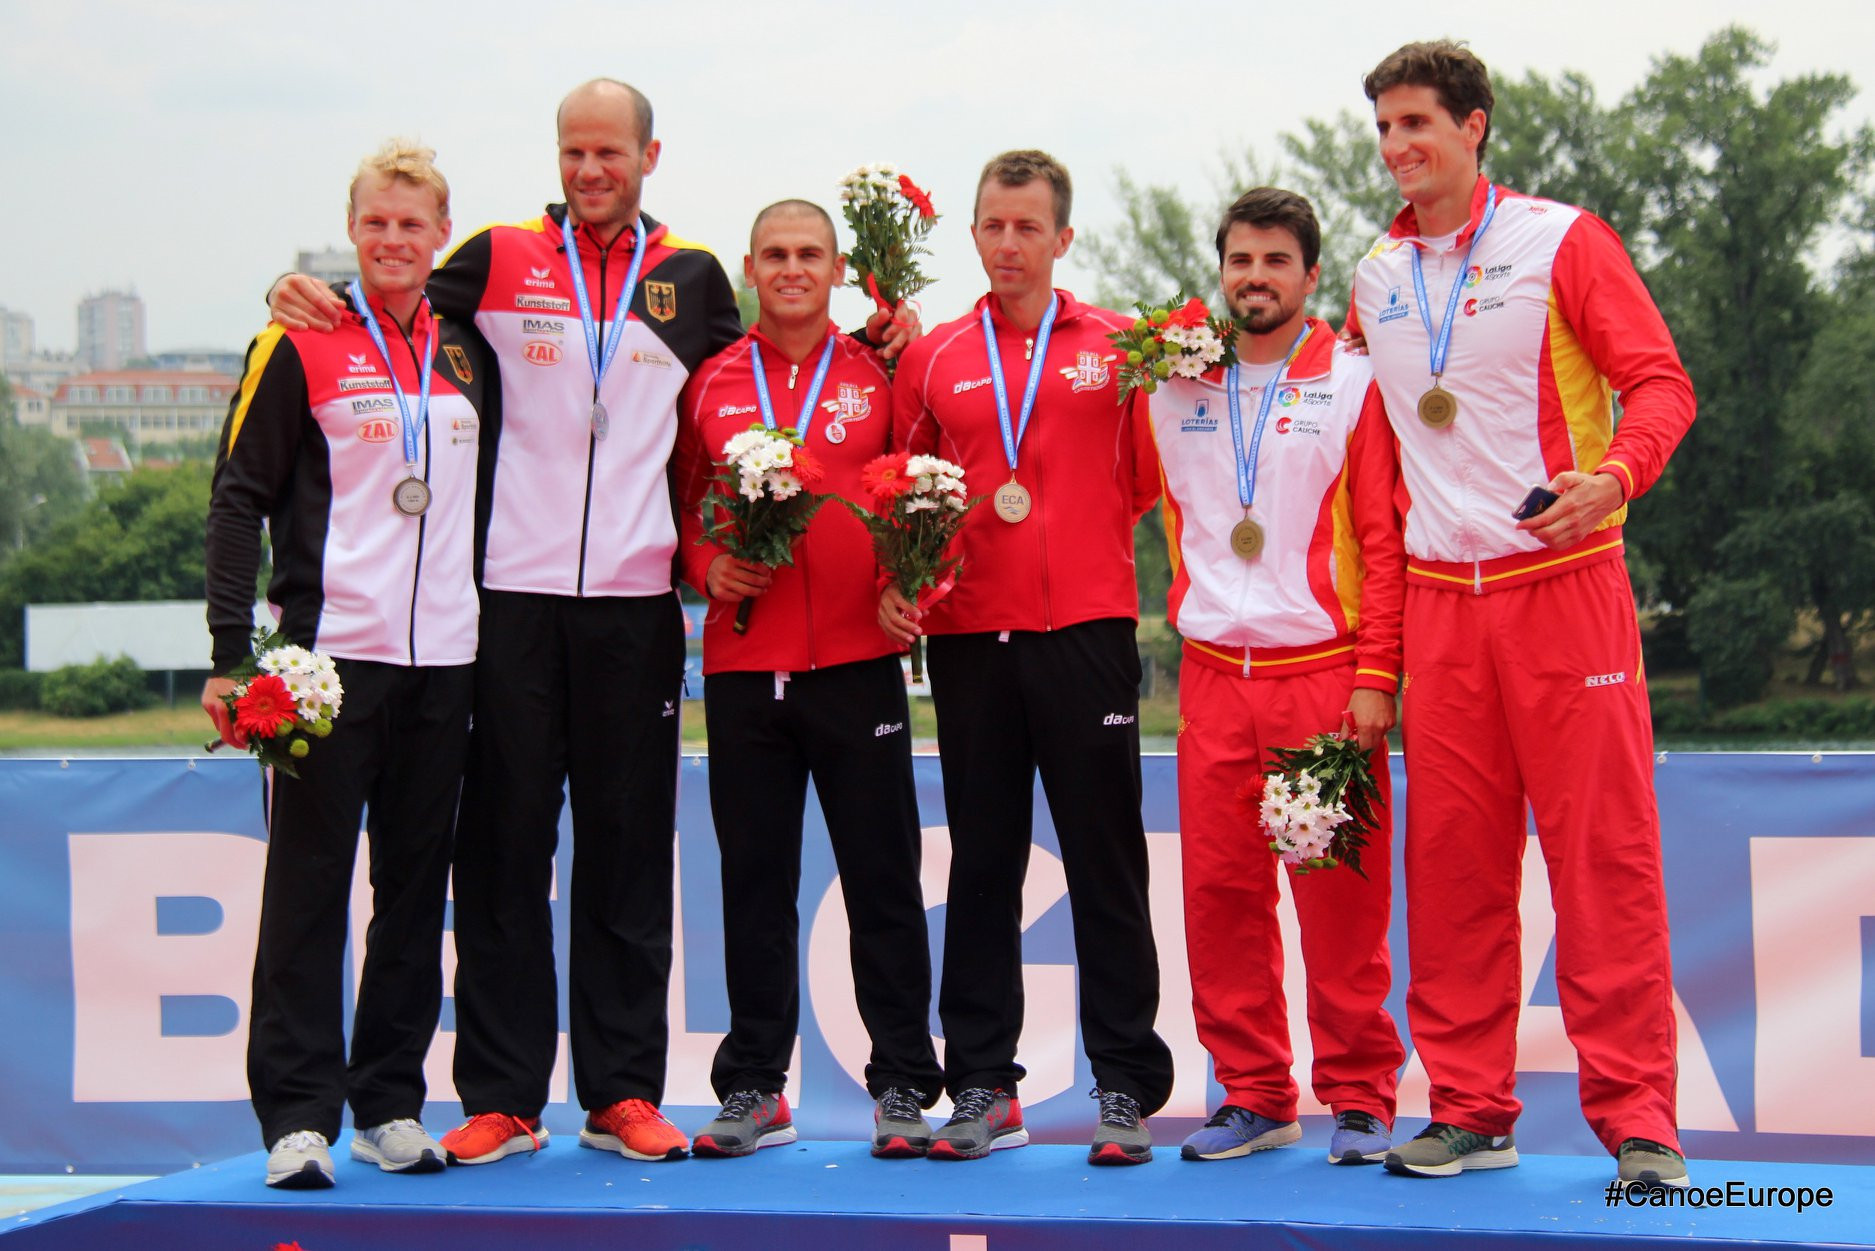 Serbia enjoyed a home European Championship gold medal today ©Canoe Europe